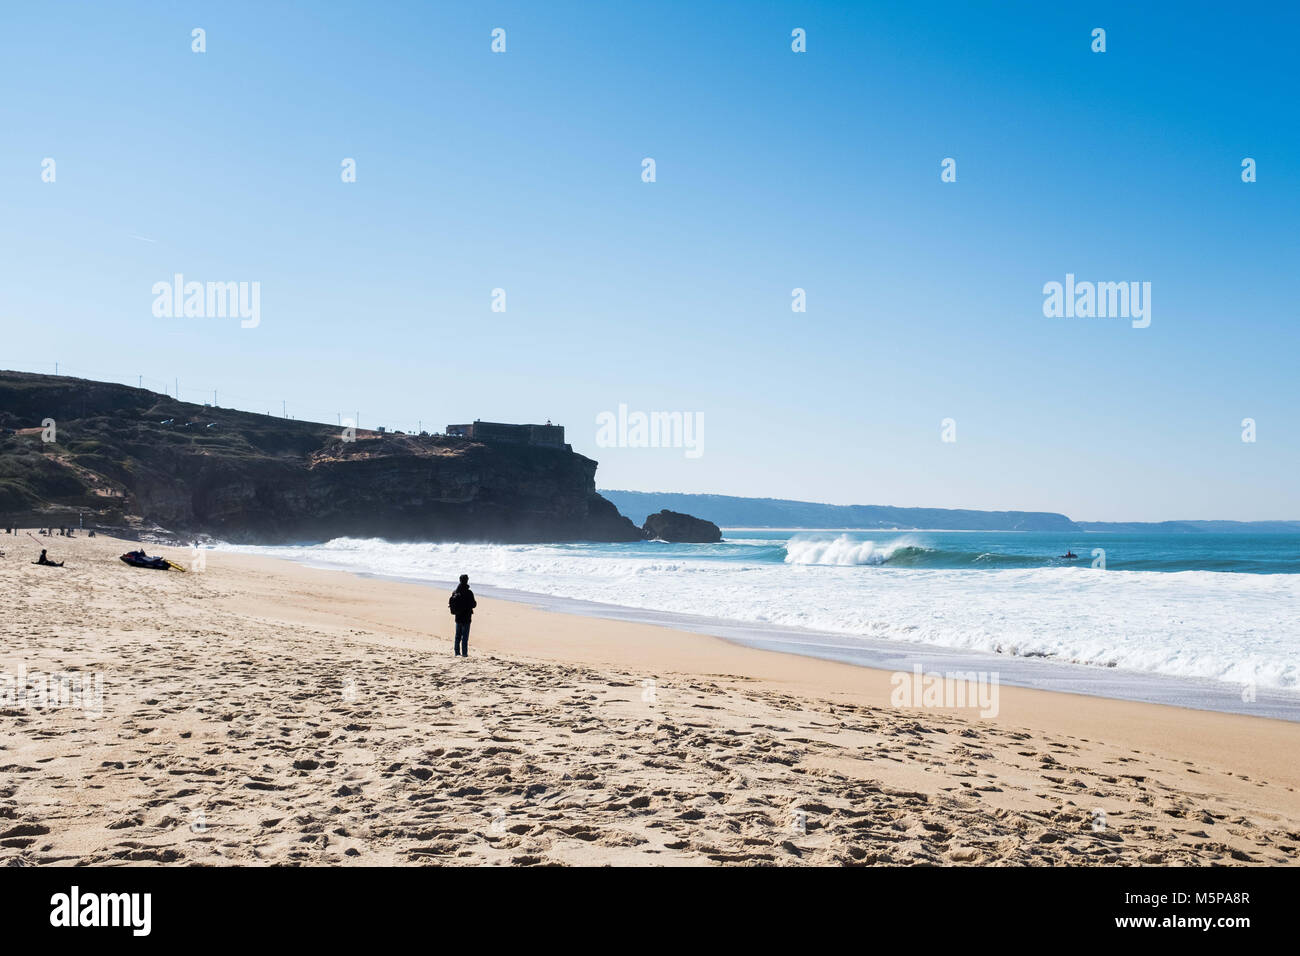 February 24, 2018 - NazarÃ, Leiria, Portugal - General view of the Praia do Norte beach where the Capitulo Perfeito event was hosted..An event that brings together some of the best free surfers in the country and the world in a tube competition at Praia do Norte, NazarÃ©...It happened on the 24th of February and the winner was William Aliotti. (Credit Image: © Capitulo Perfeito-001.jpg/SOPA Images via ZUMA Wire) Stock Photo